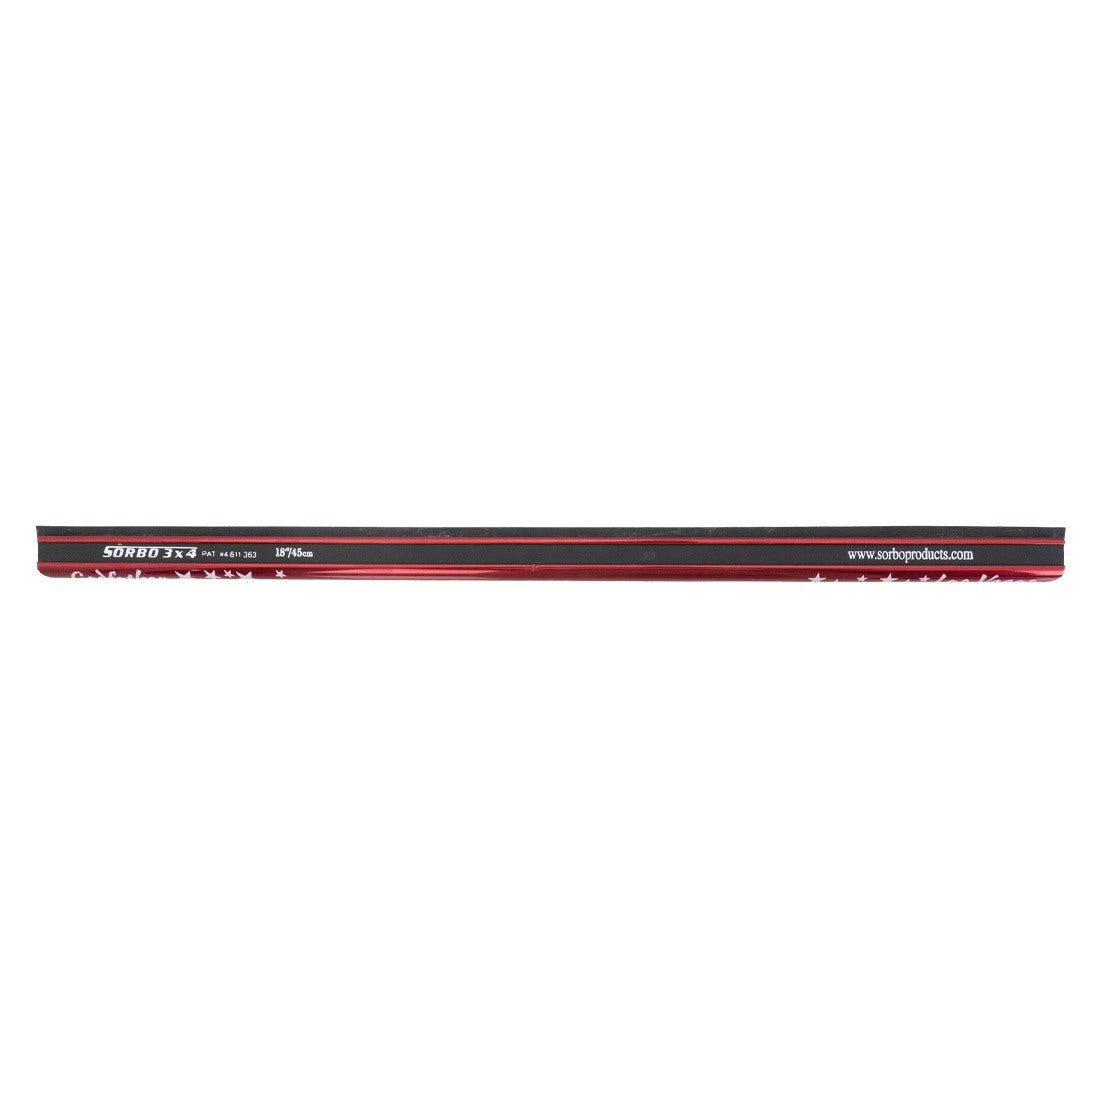 Sorbo 2023 Limited Edition Squeegee Channel Front View